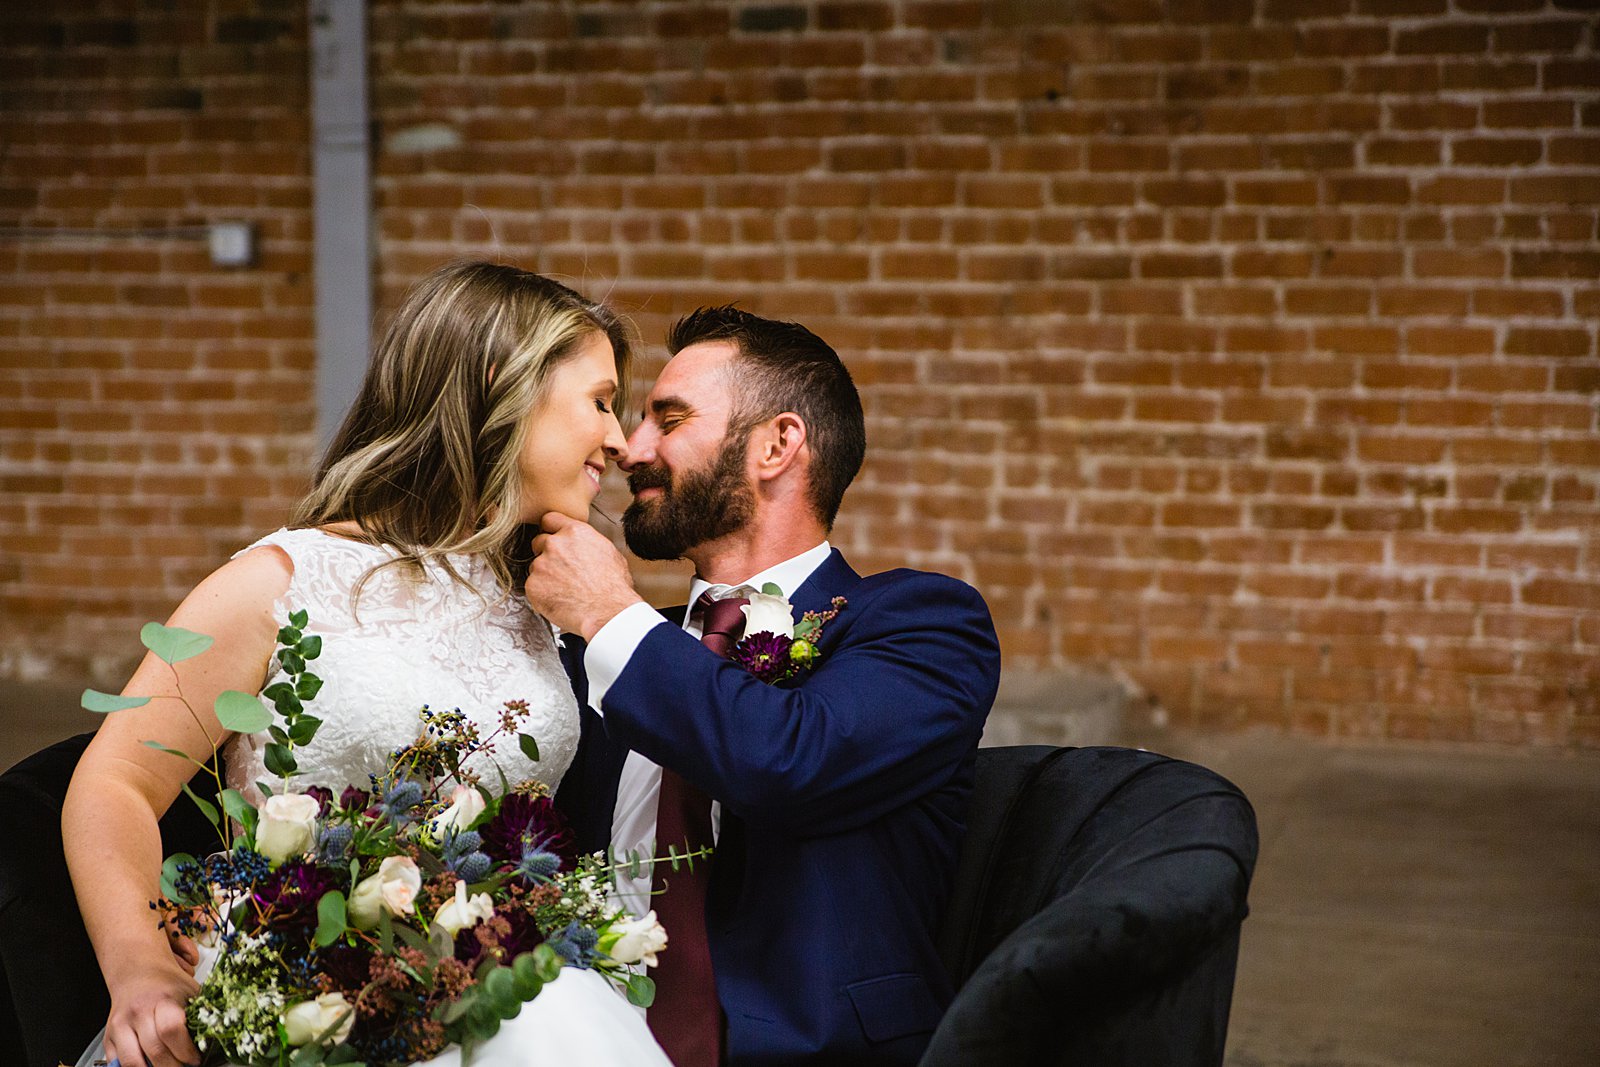 Bride and Groom share an intimate moment at their Sunkist Warehouse wedding by Arizona wedding photographer PMA Photography.